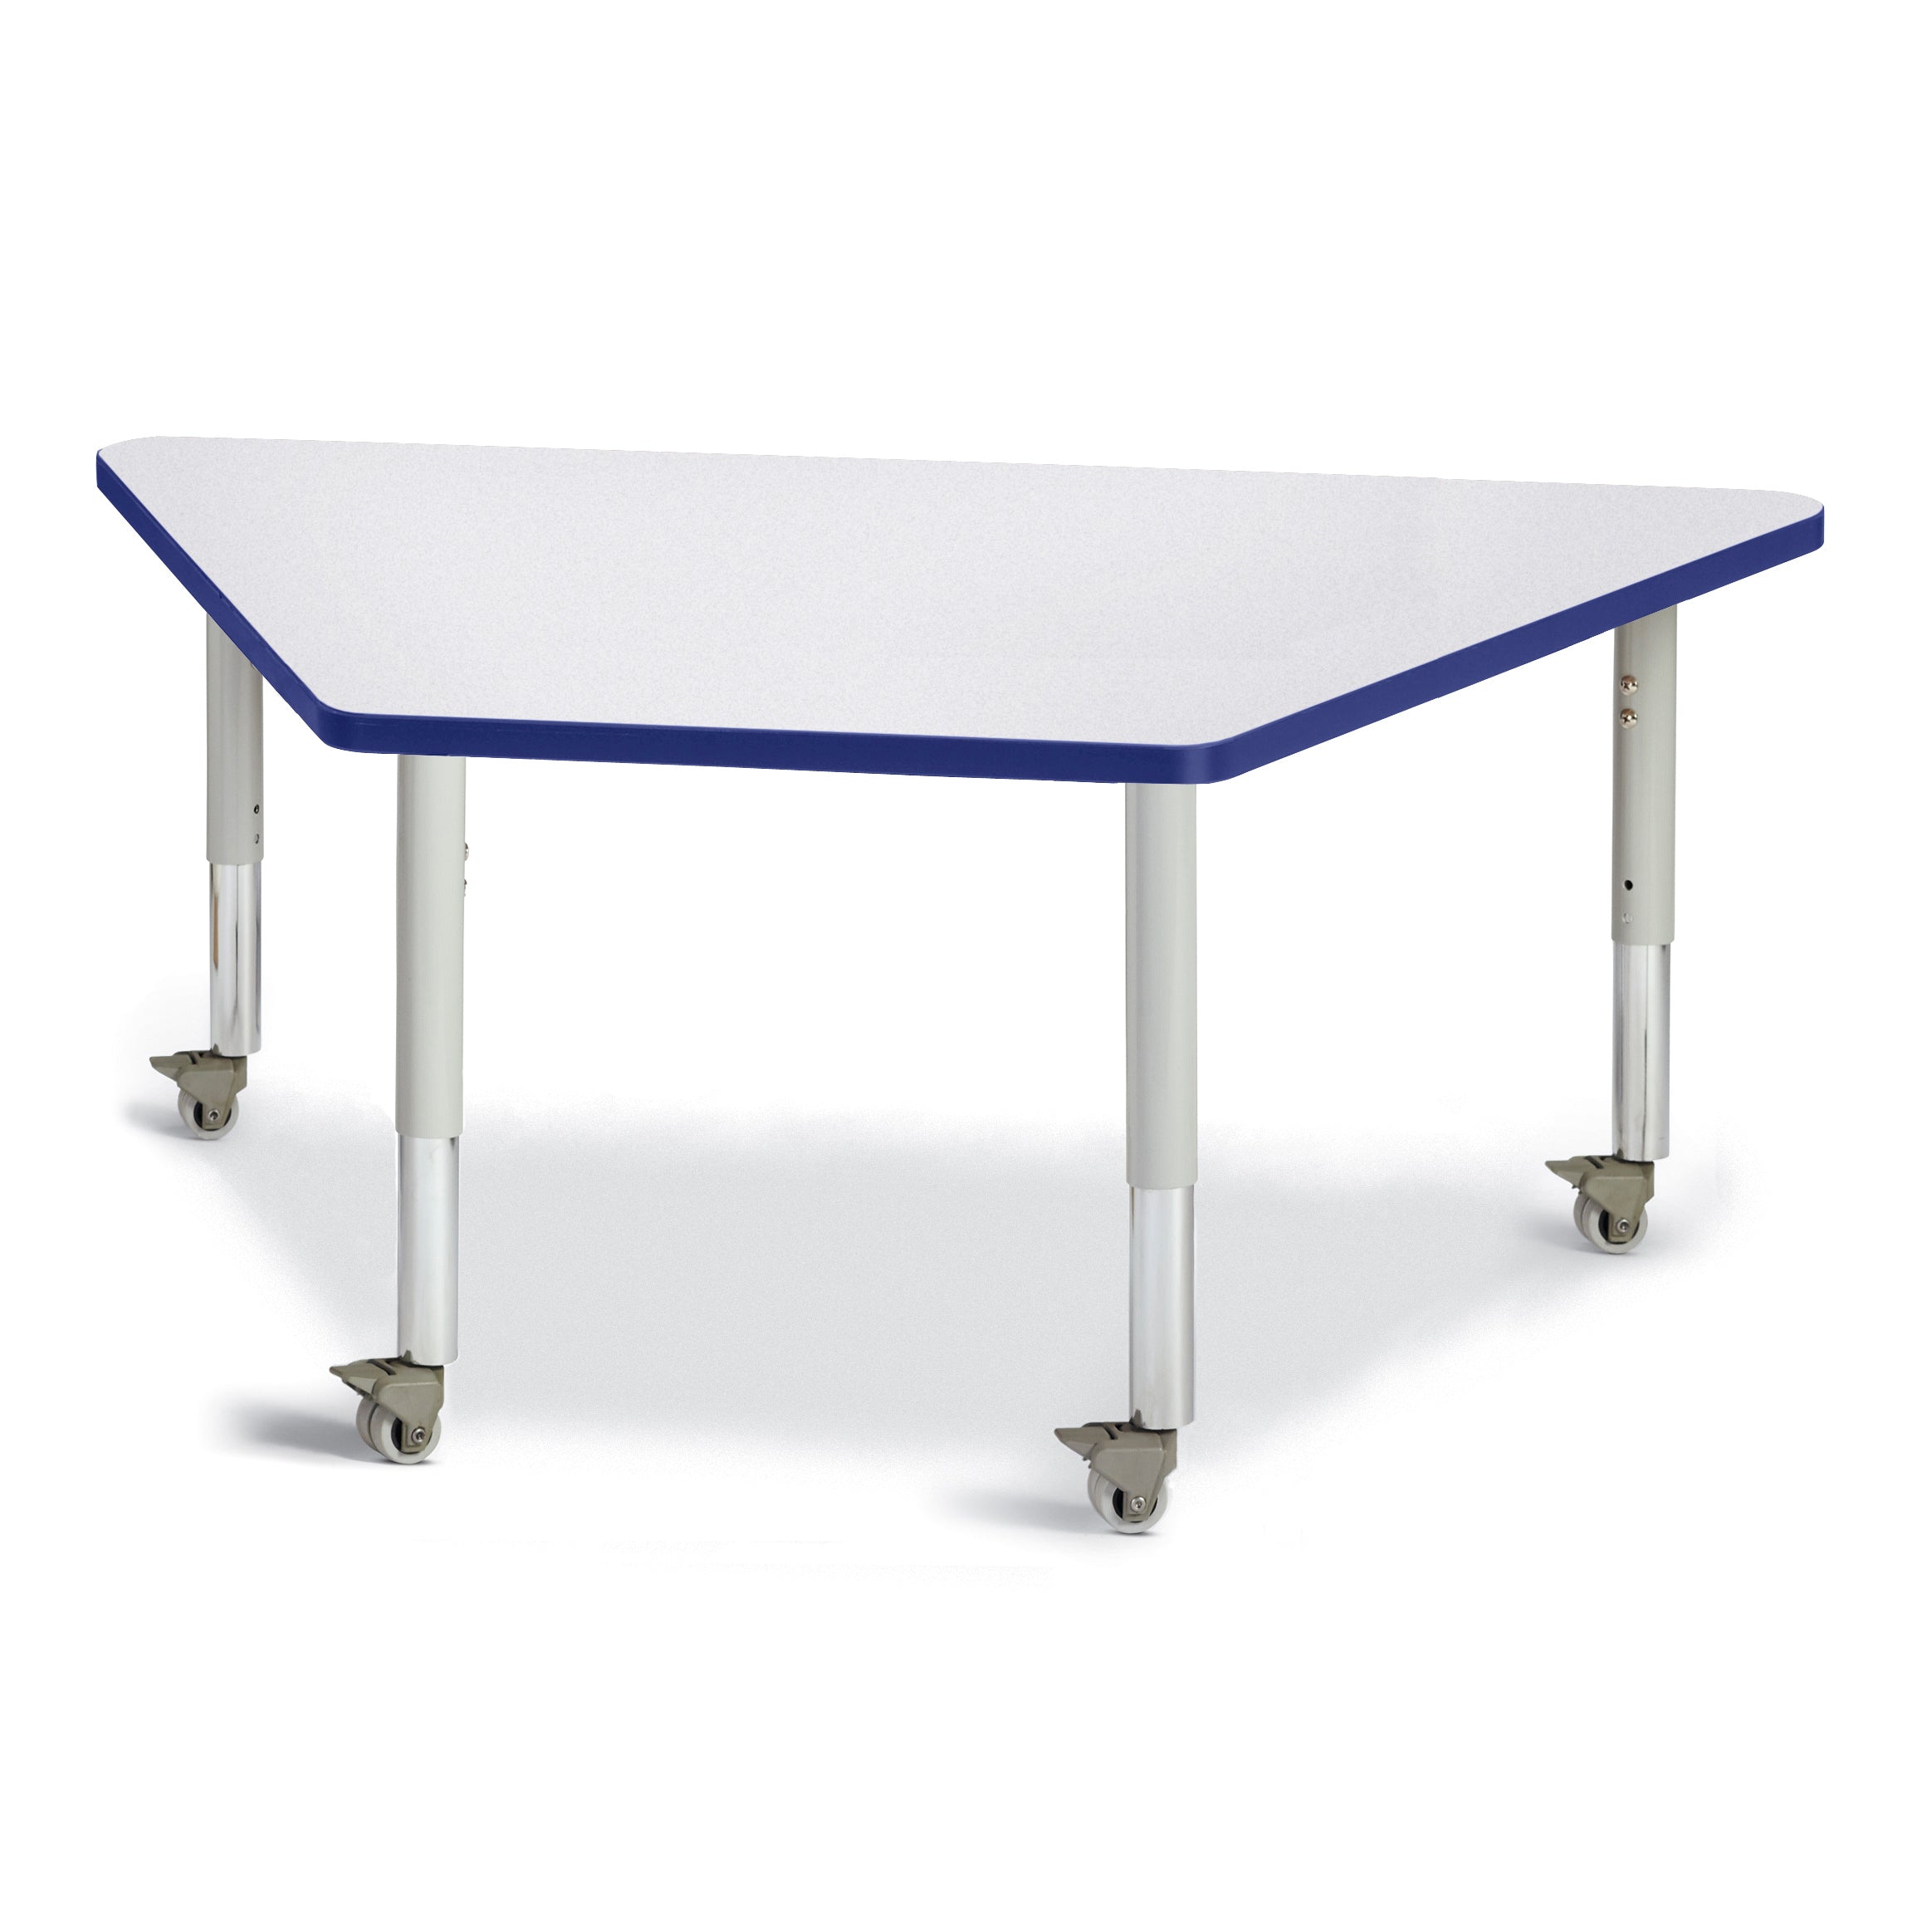 6443JCM003, Berries Trapezoid Activity Tables - 30" X 60", Mobile - Freckled Gray/Blue/Gray